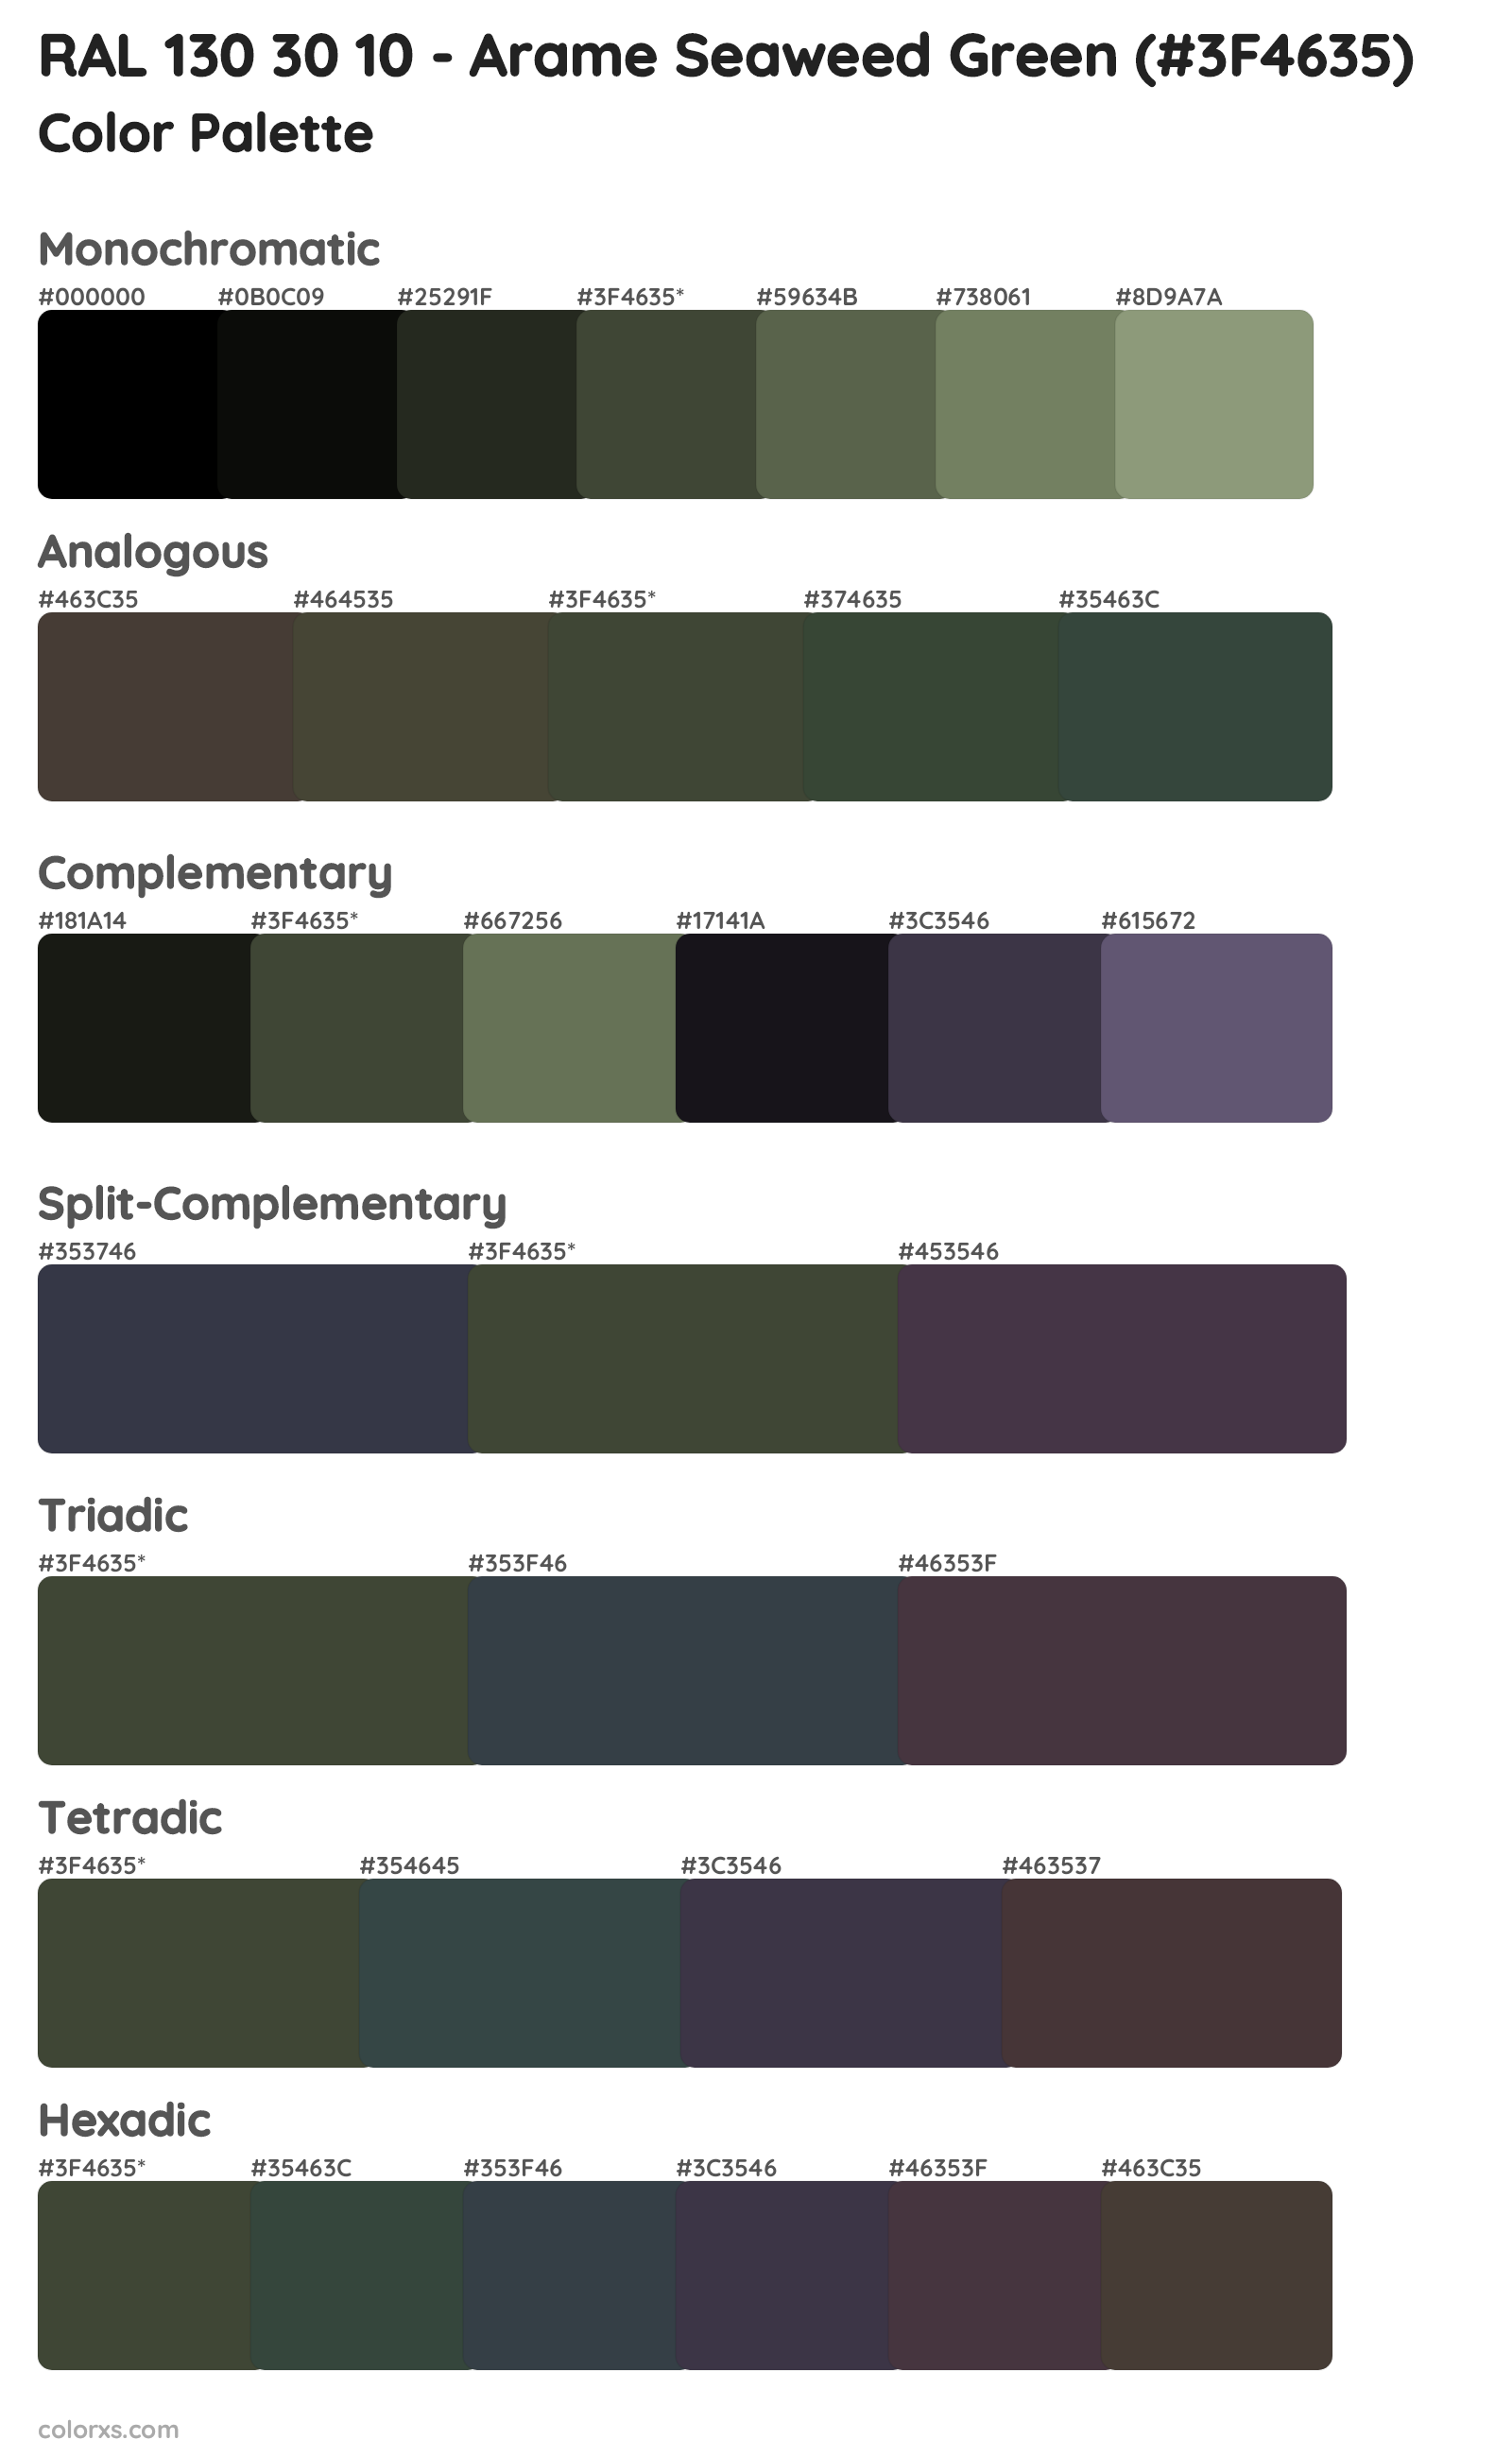 RAL 130 30 10 - Arame Seaweed Green Color Scheme Palettes